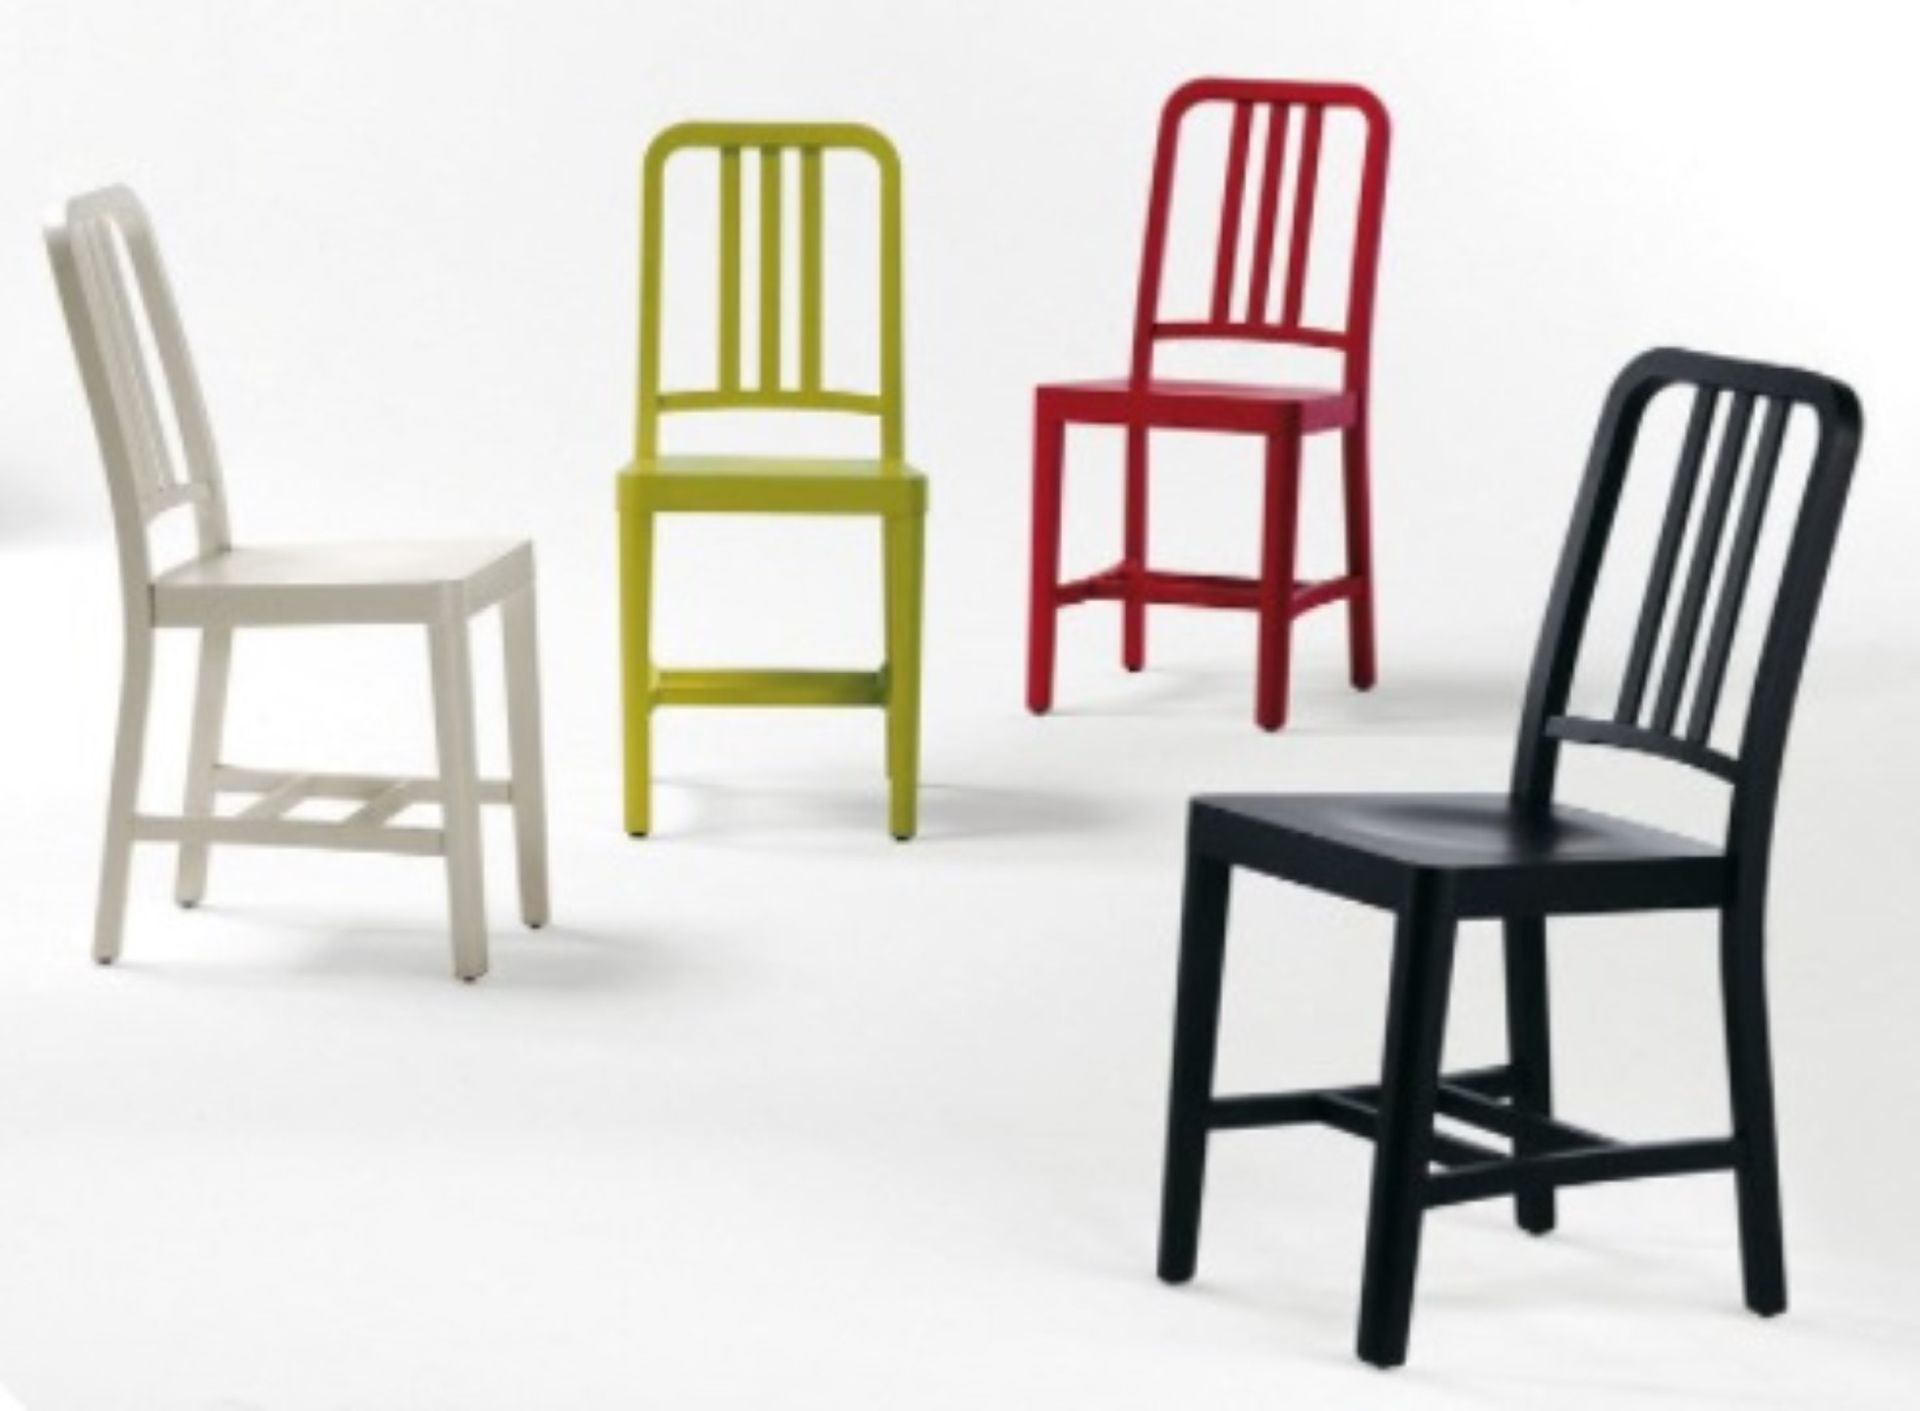 6 x Designer Billiani CO2 Contemporary Wooden Dining Chairs - Designed By Aldo Cibic - Made in Italy - Image 15 of 15